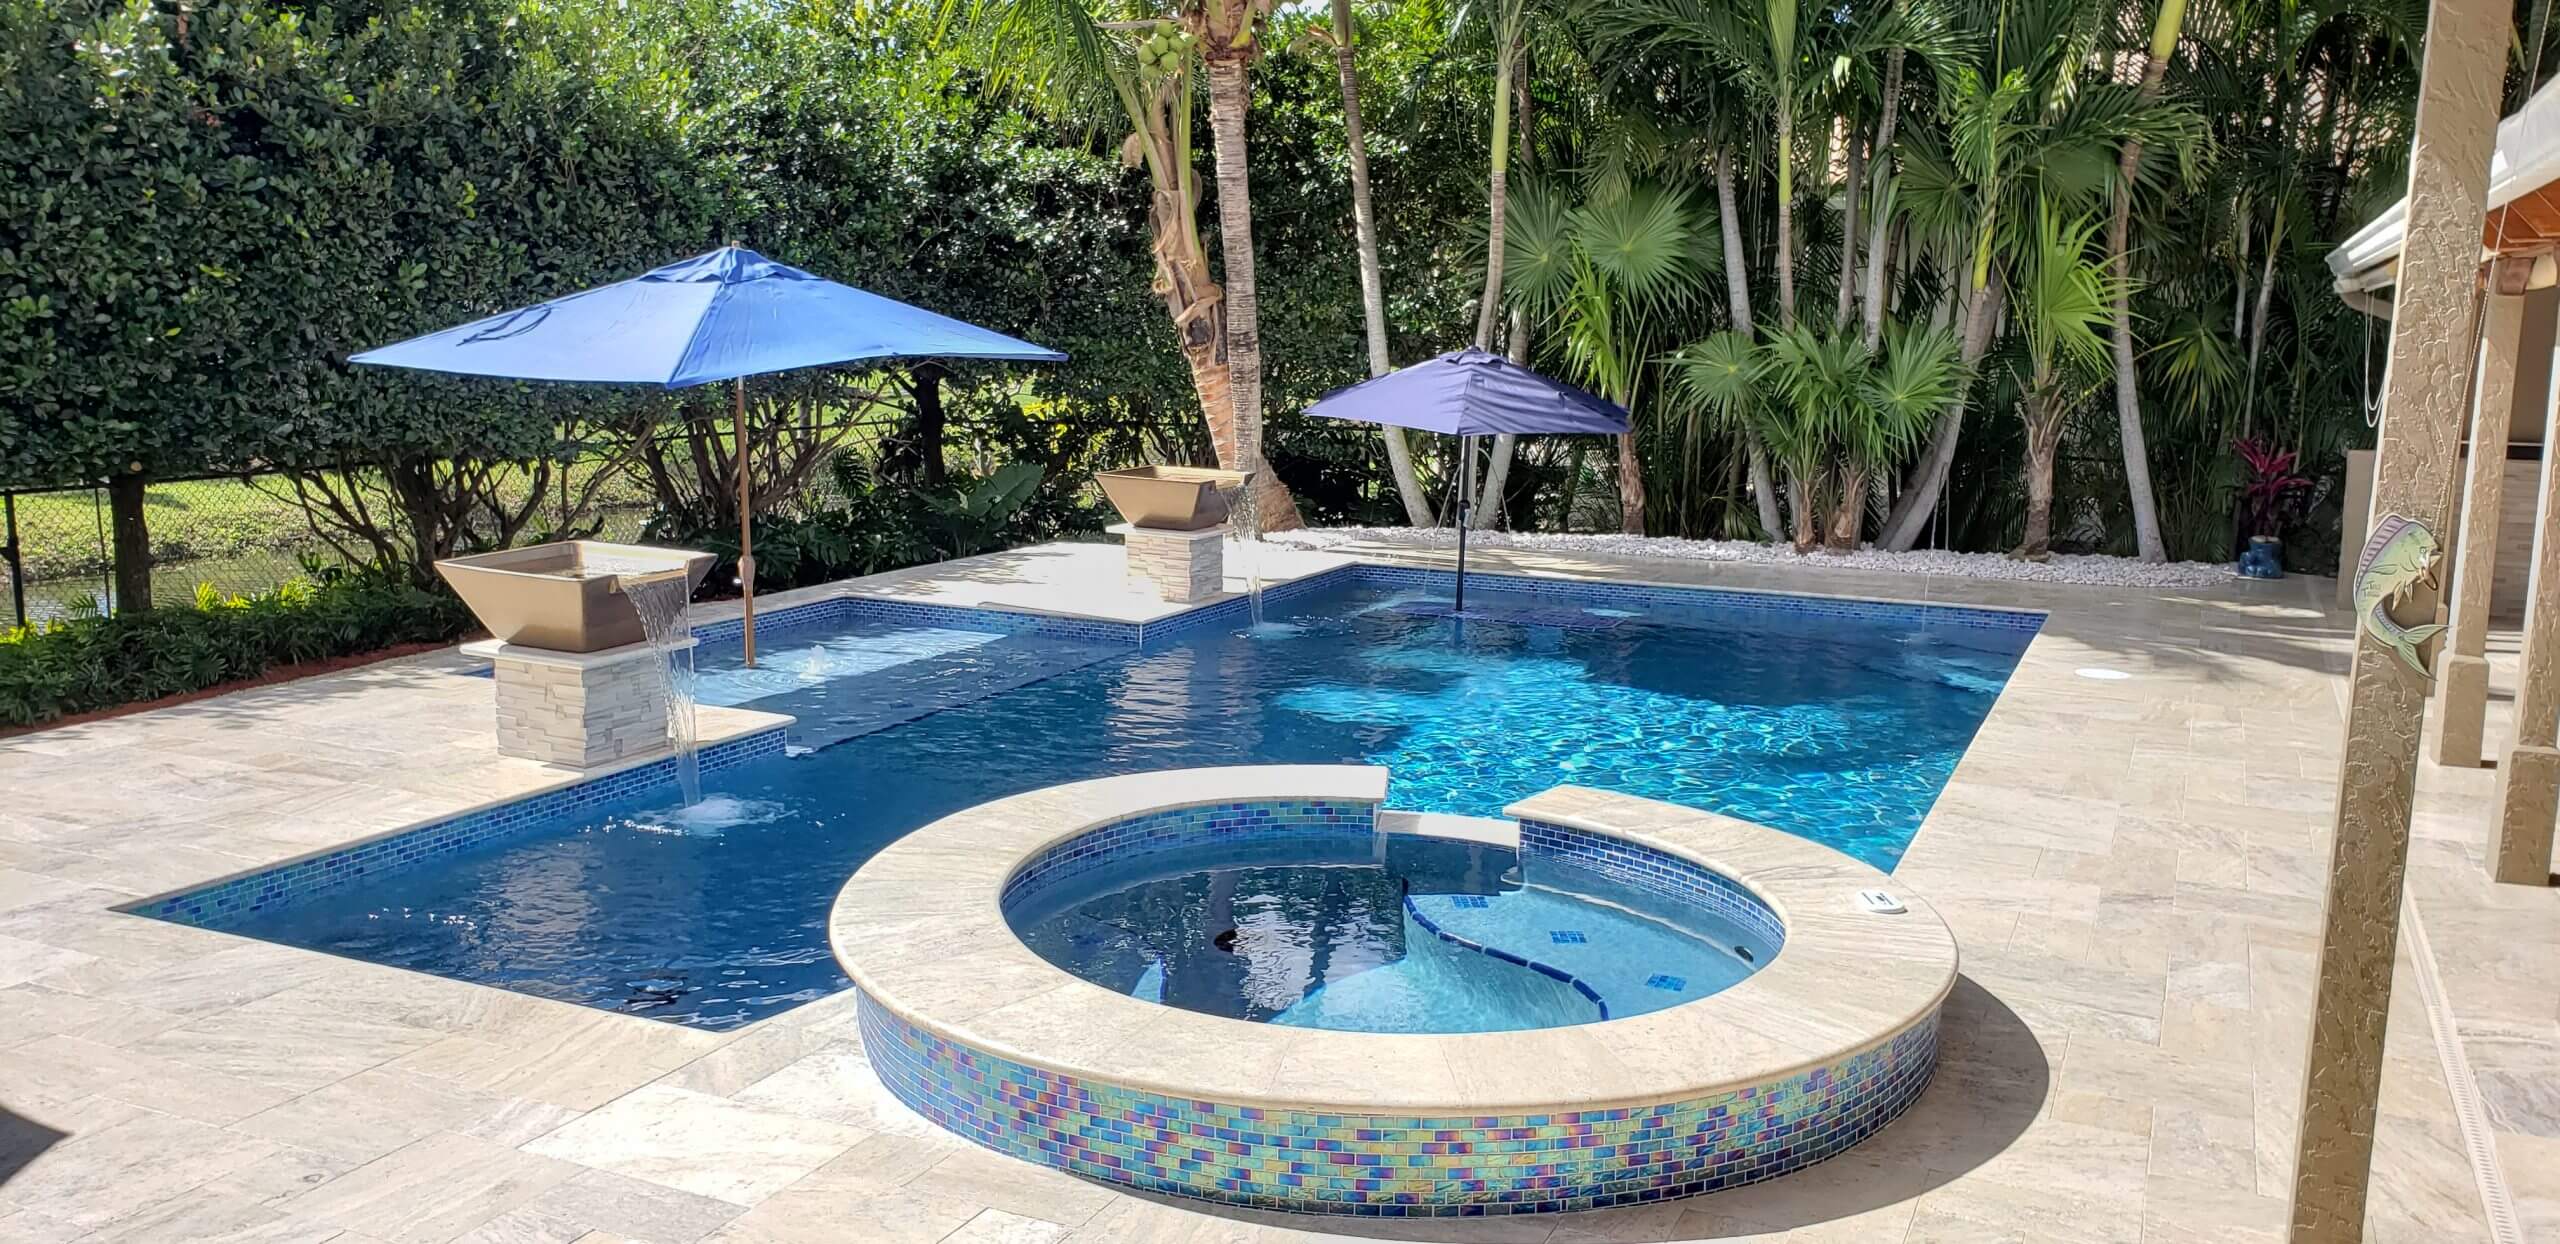 How to Resurface a Pool